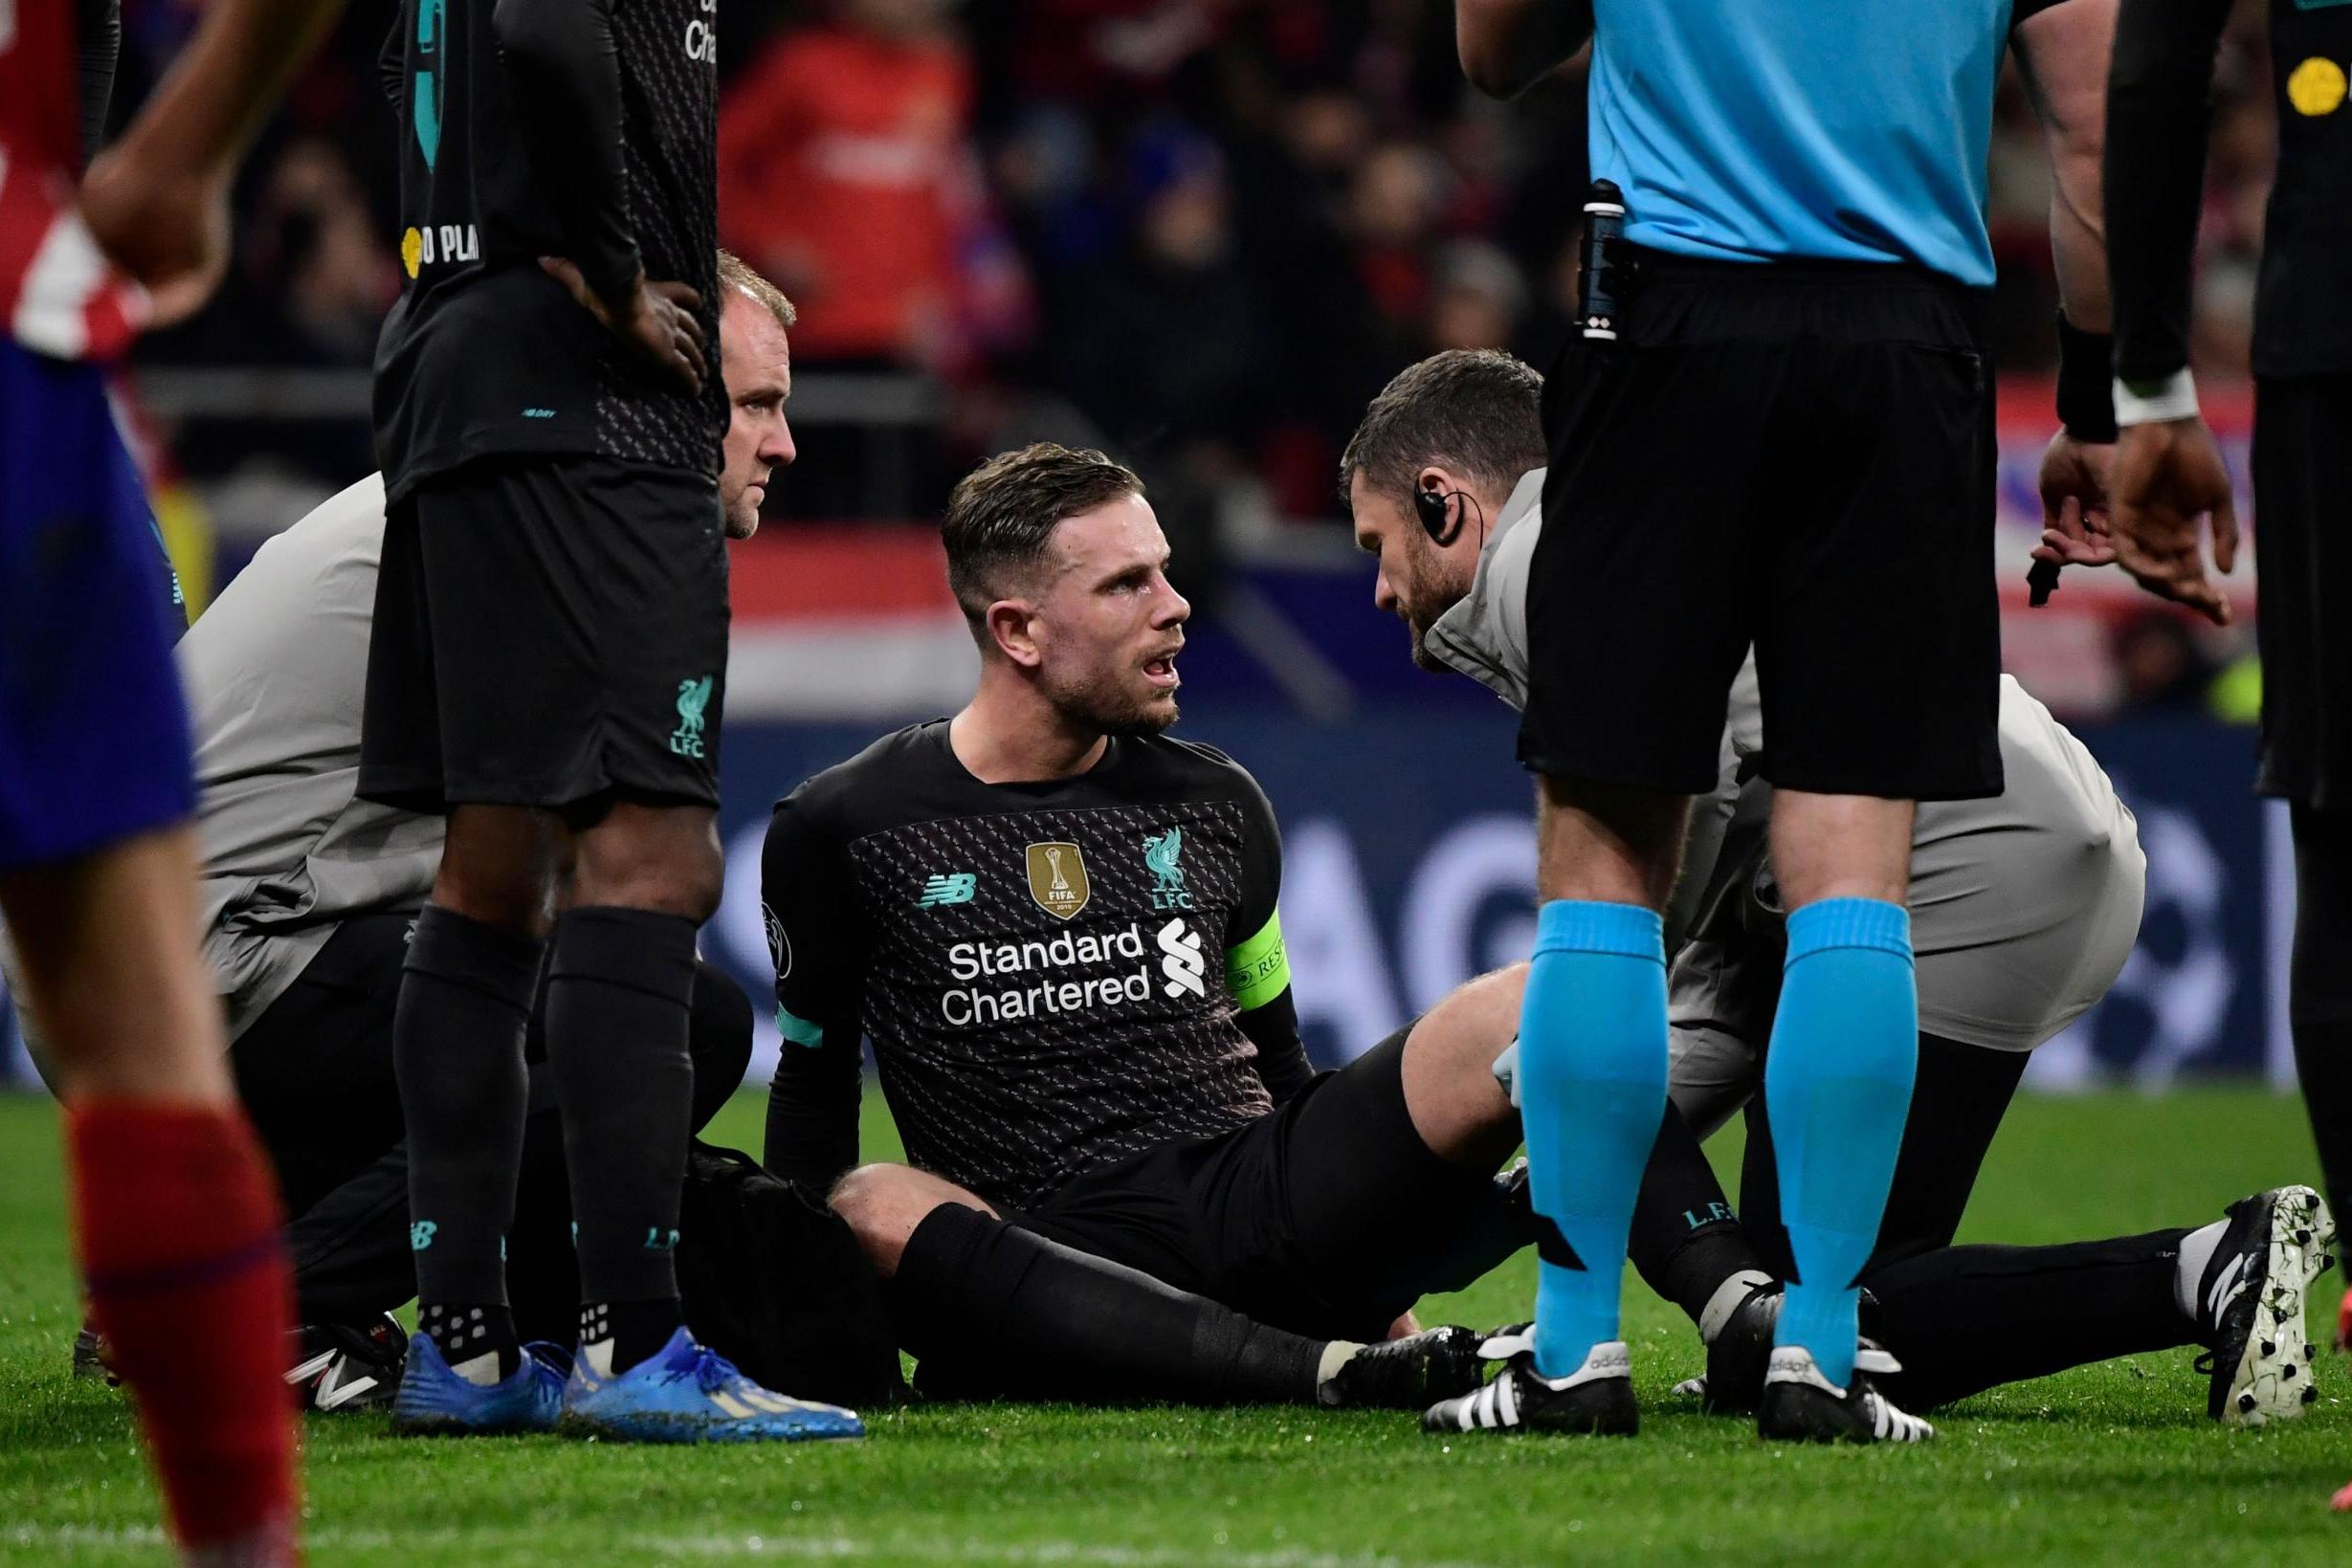 liverpool captain jordan henderson a major doubt for west ham clash with hamstring injury